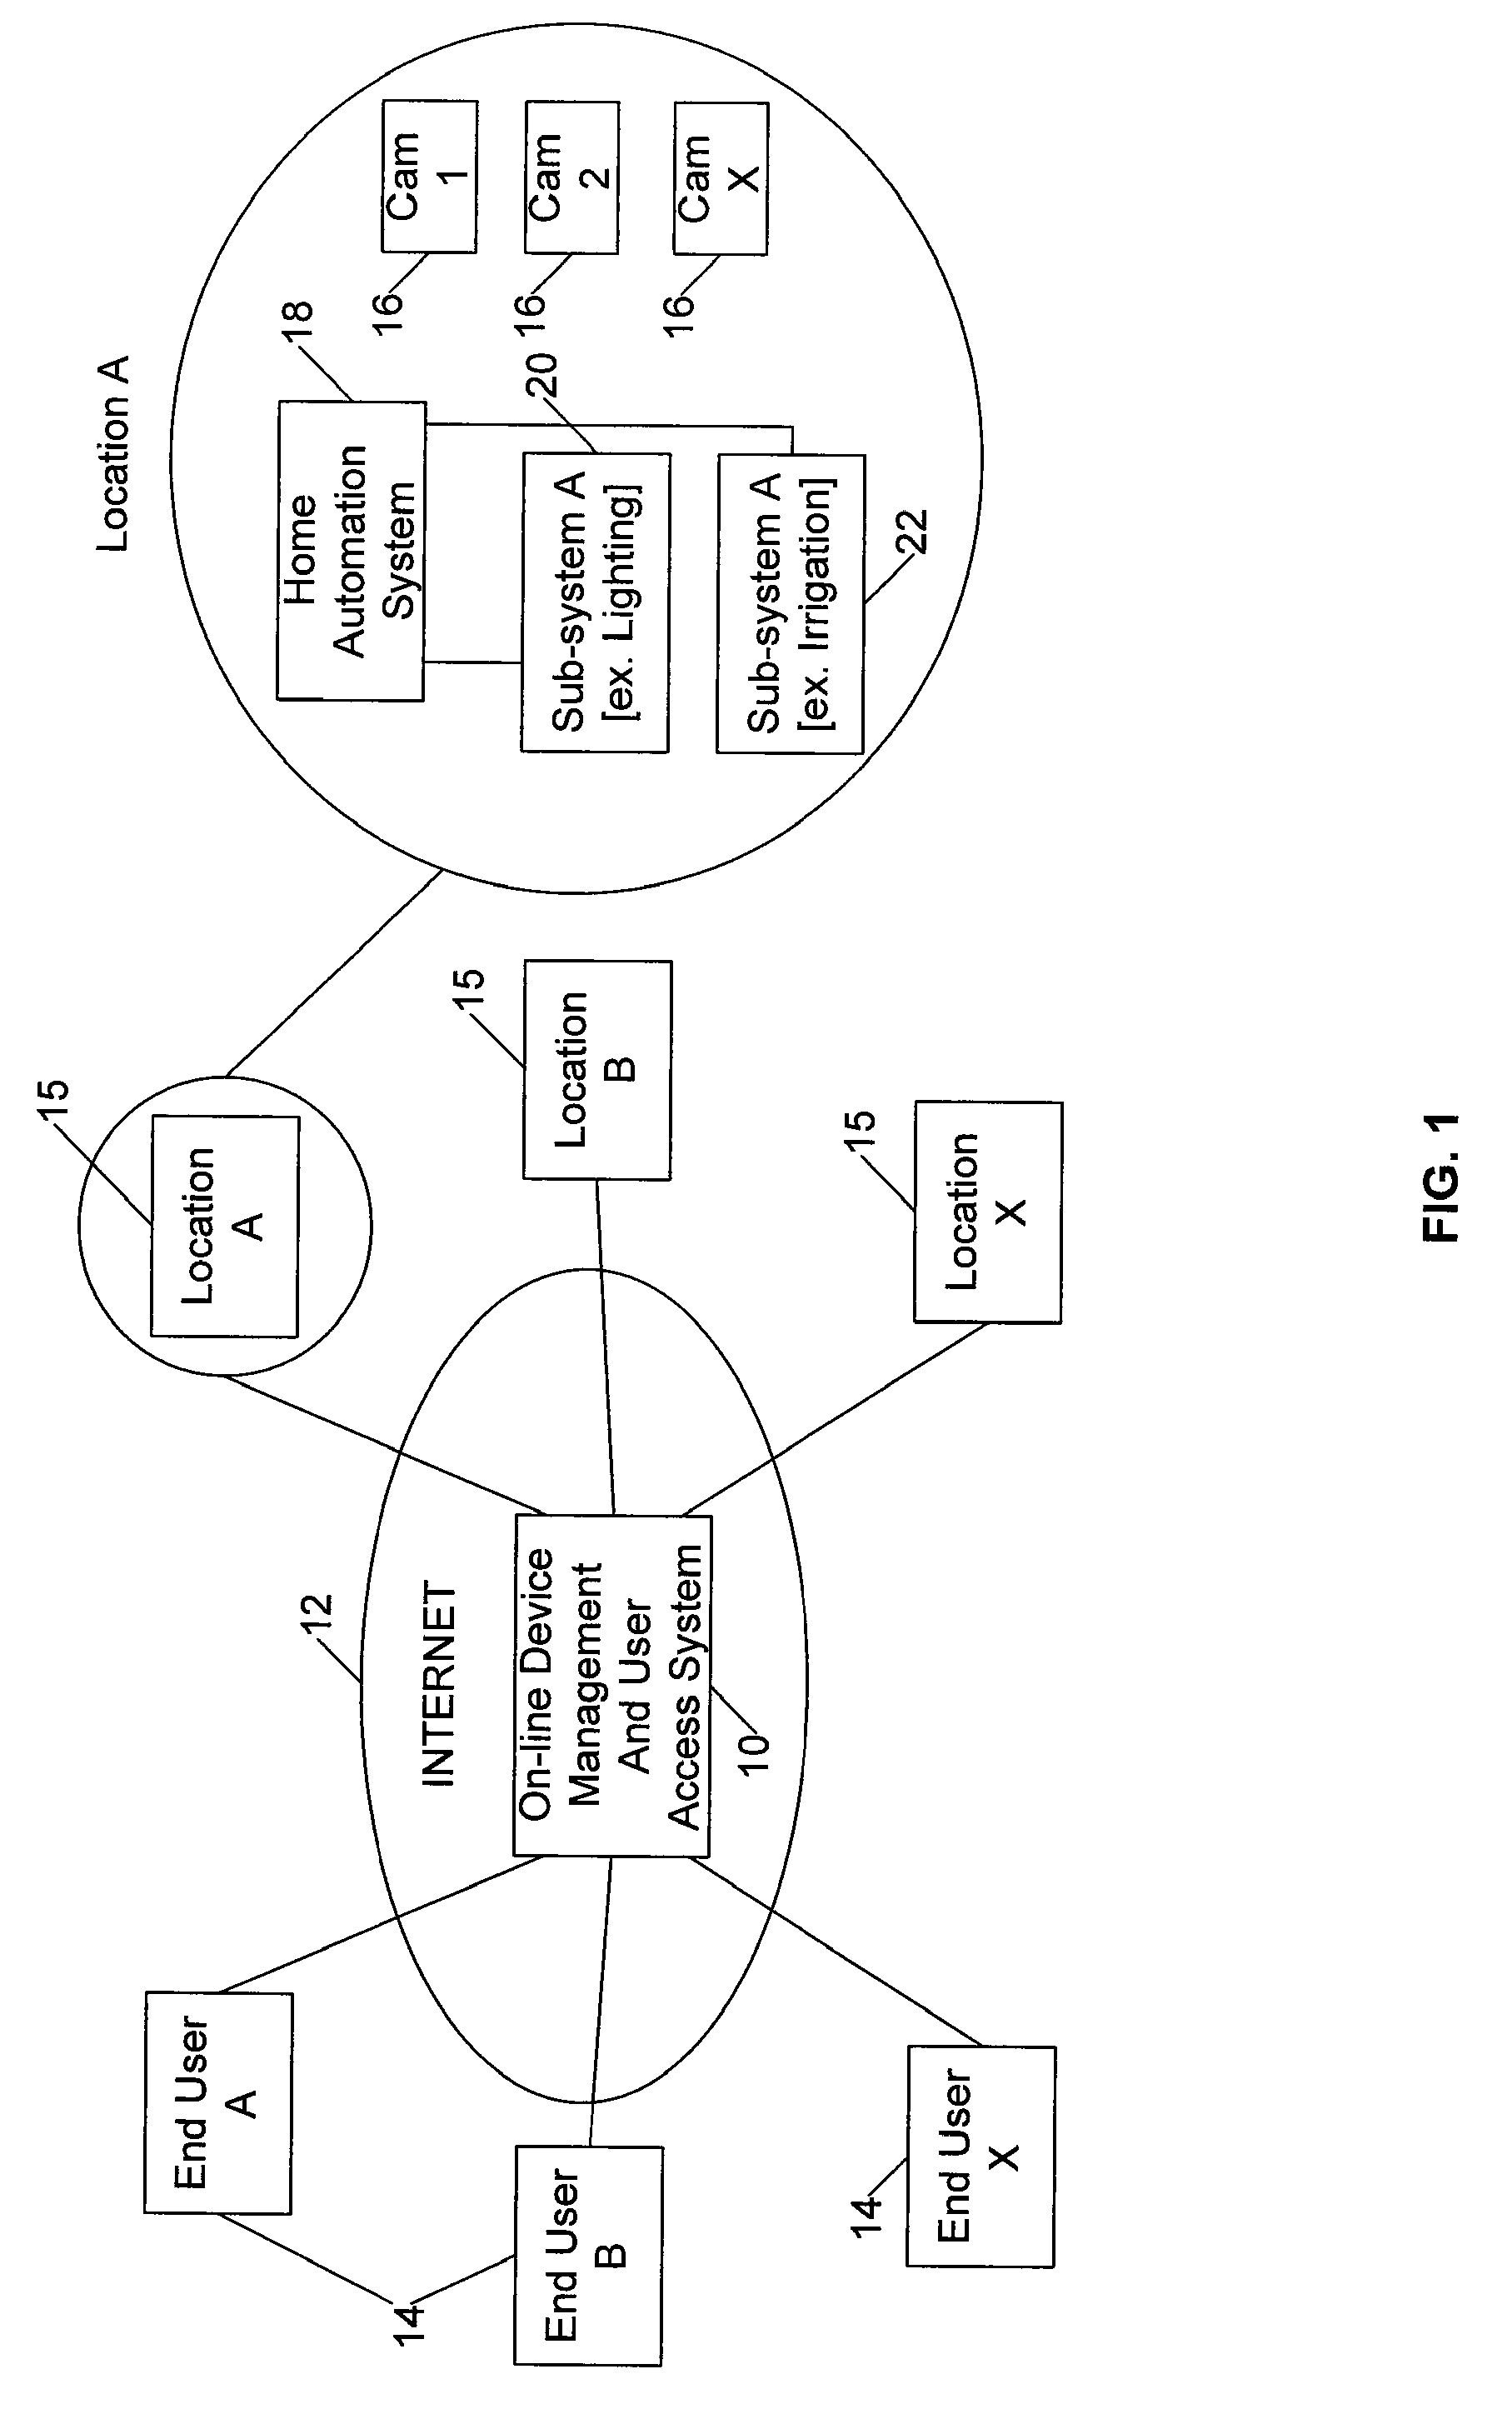 On-line portal system and method for management of devices and services